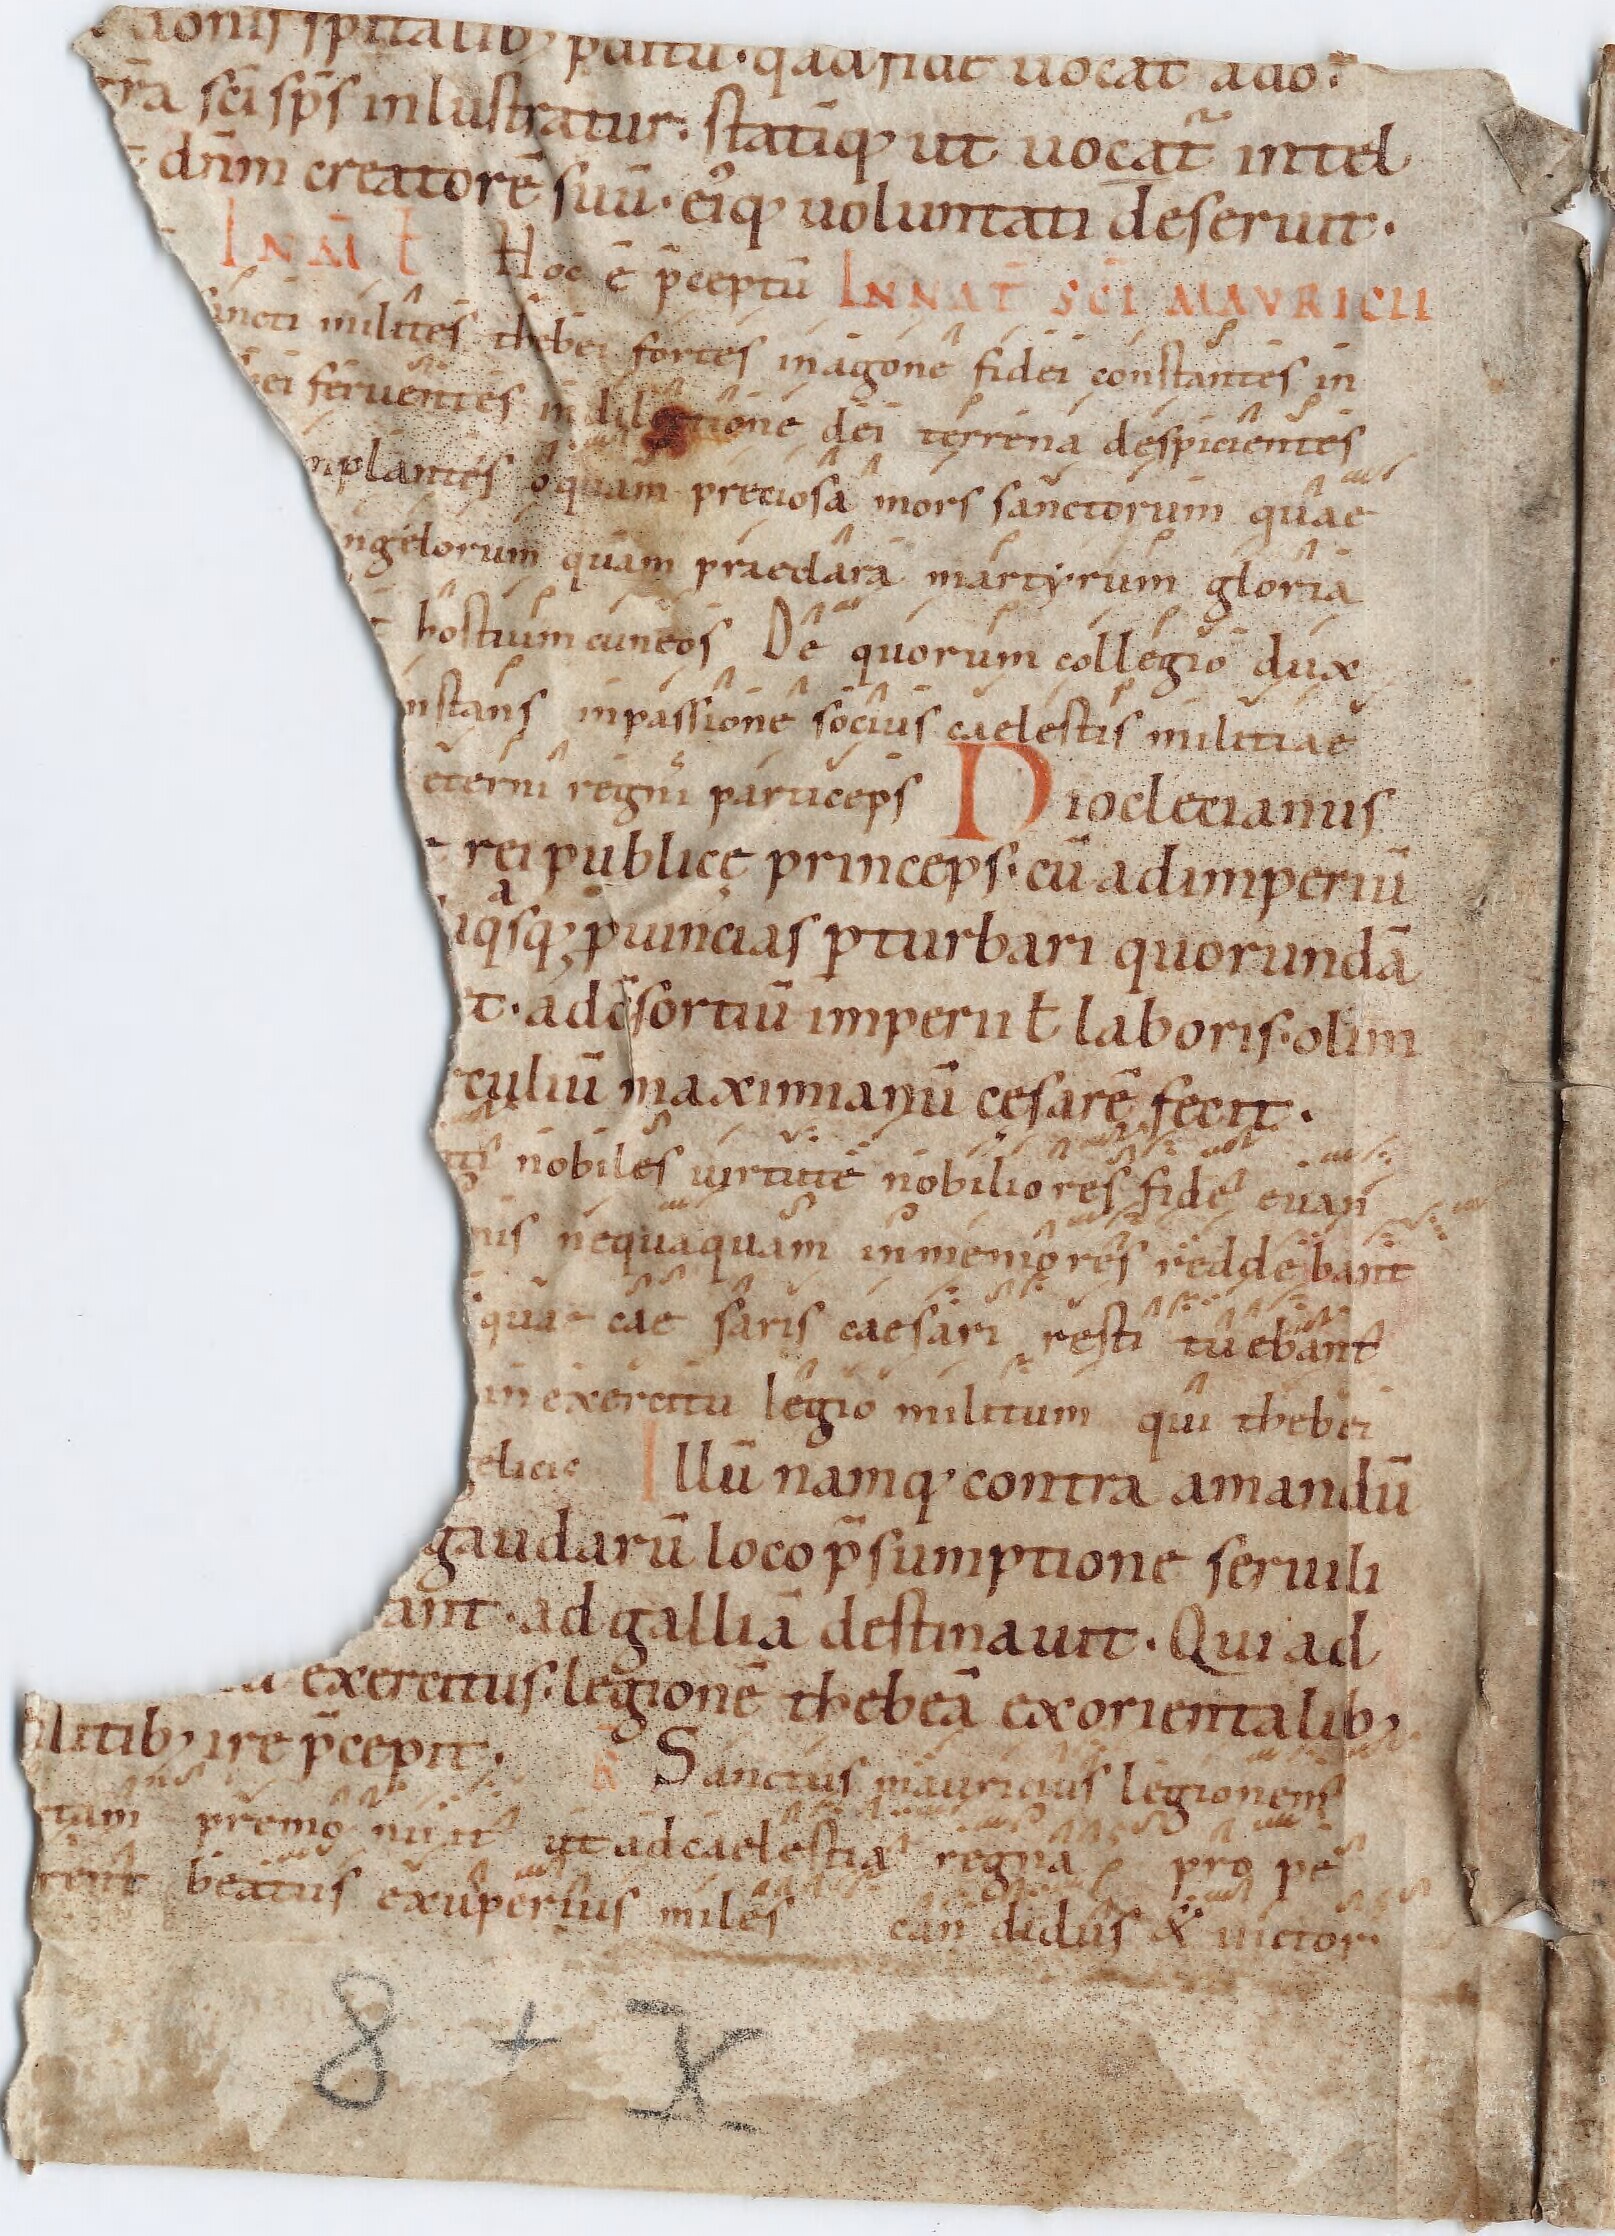 Ripped manuscript fragment with St. Maurice in red text indicating the beginning of his sung office.